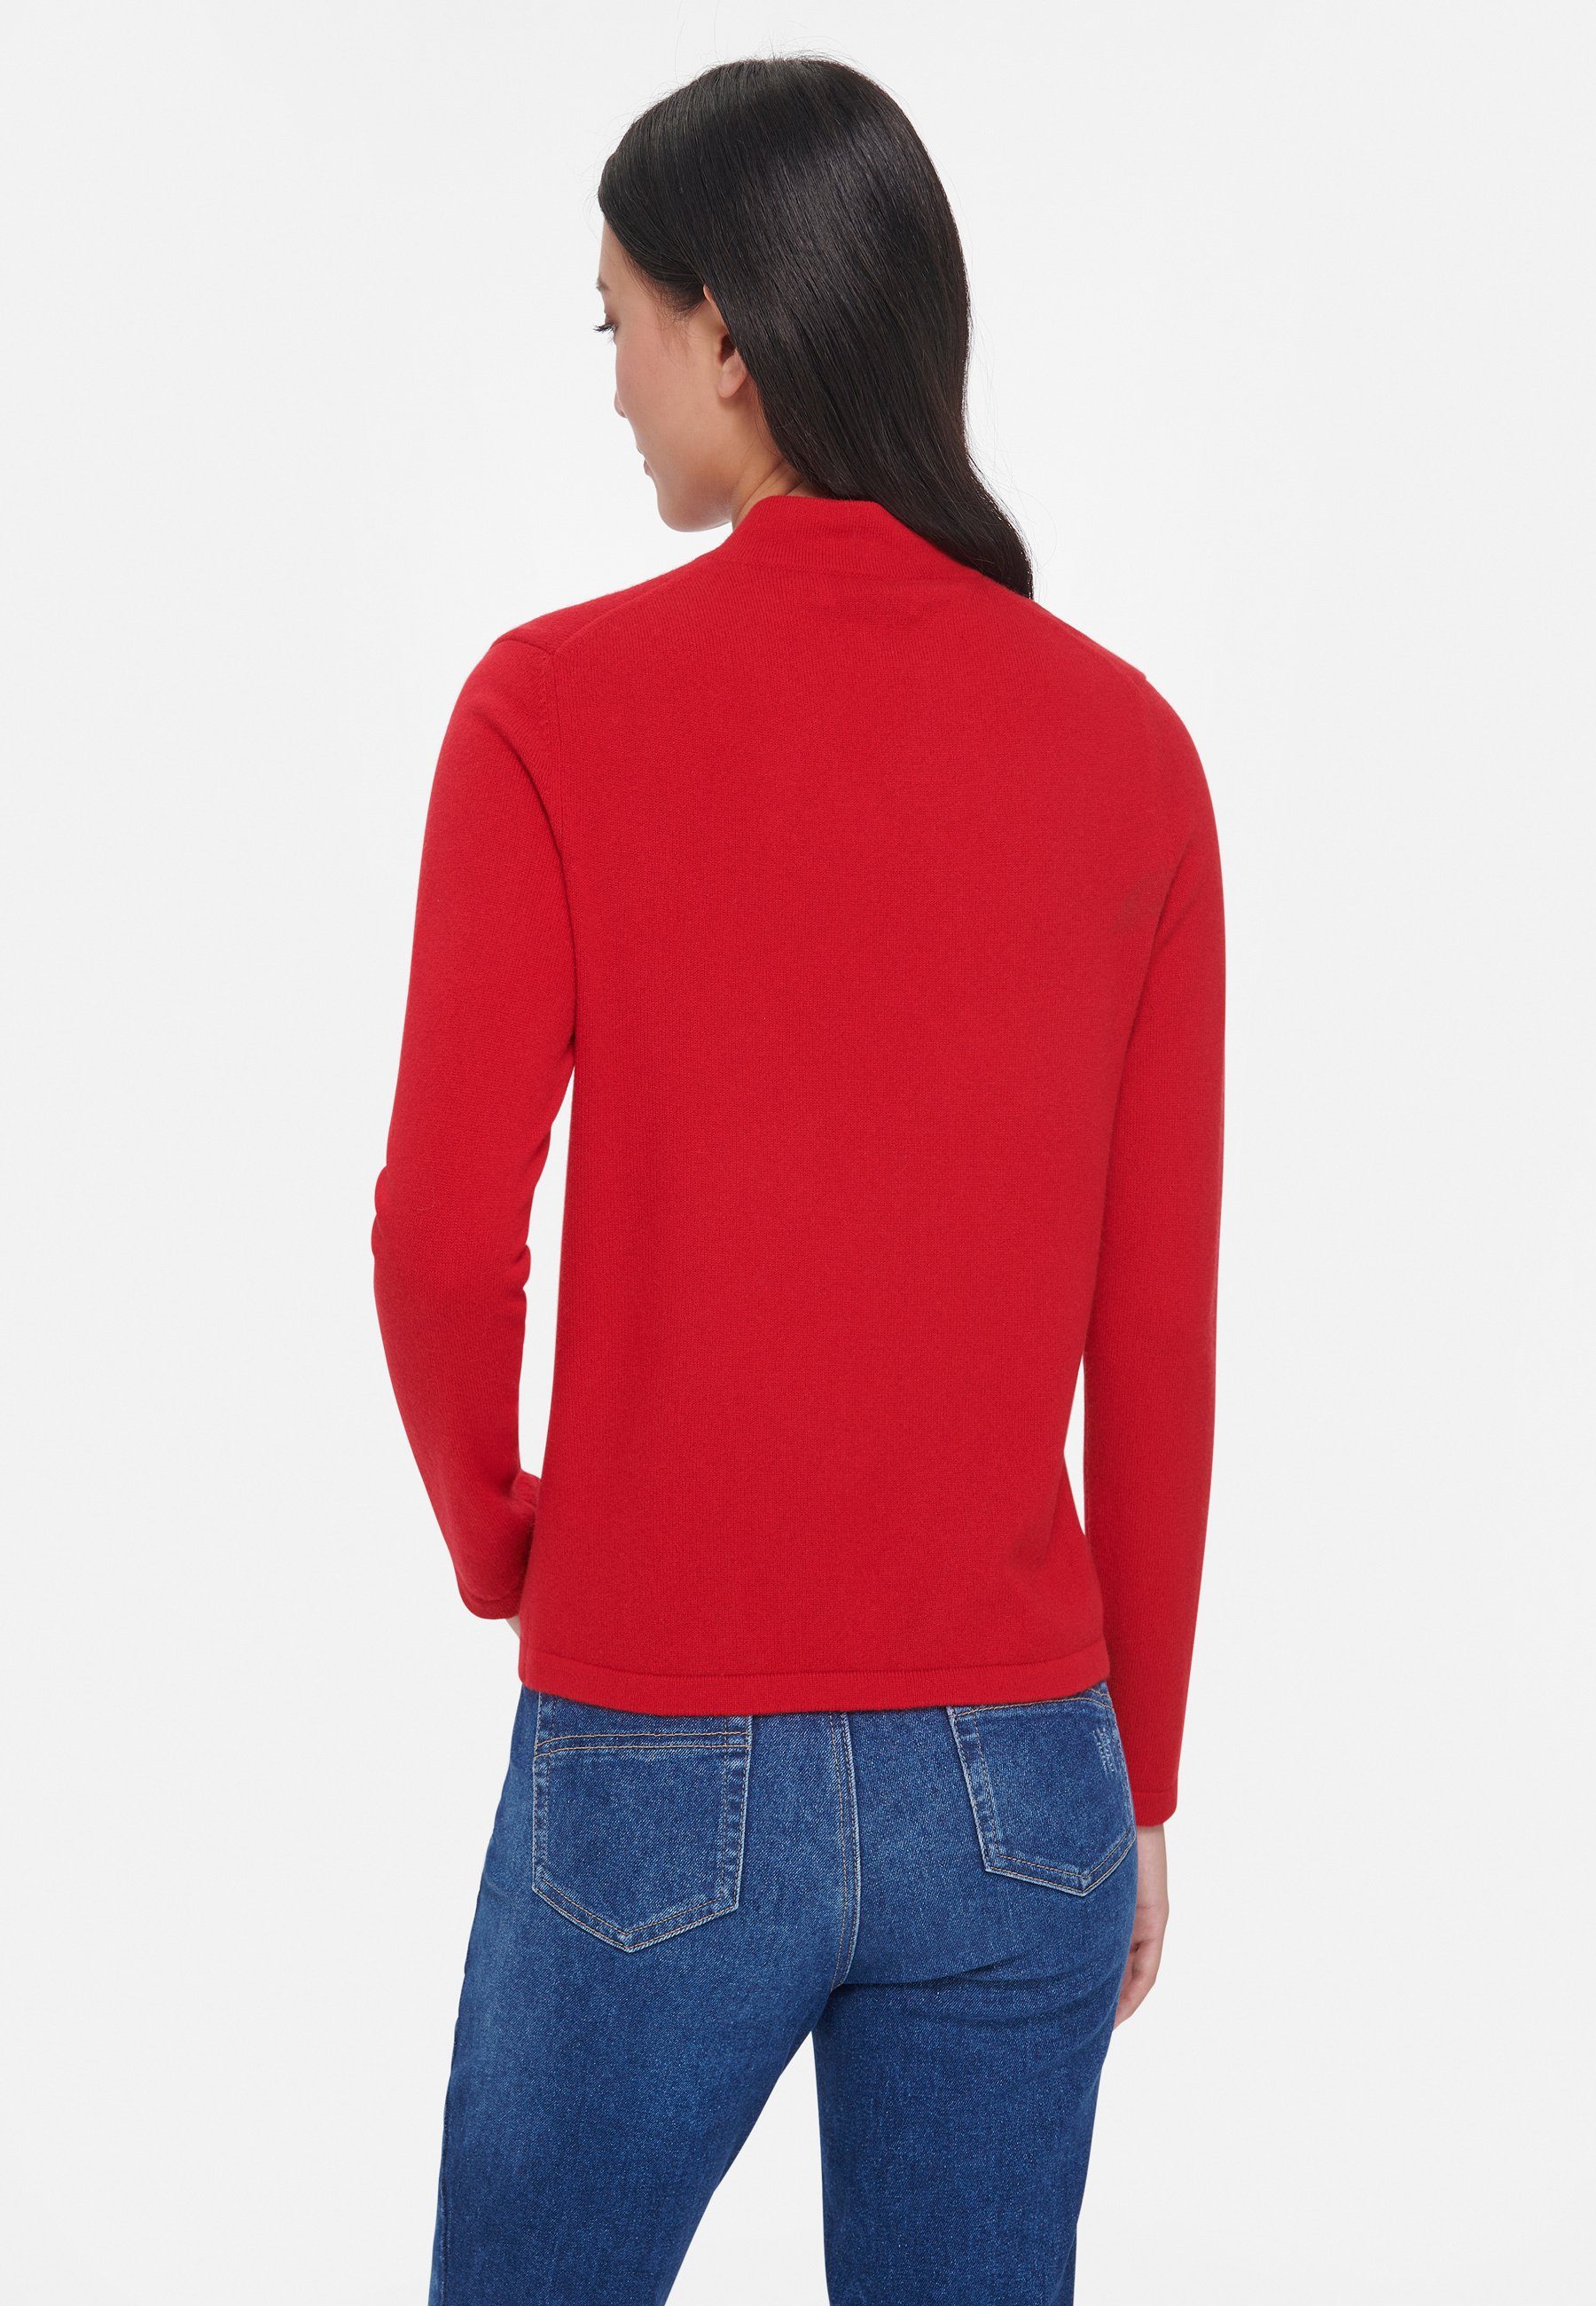 Hahn Peter Cashmere rot Strickpullover